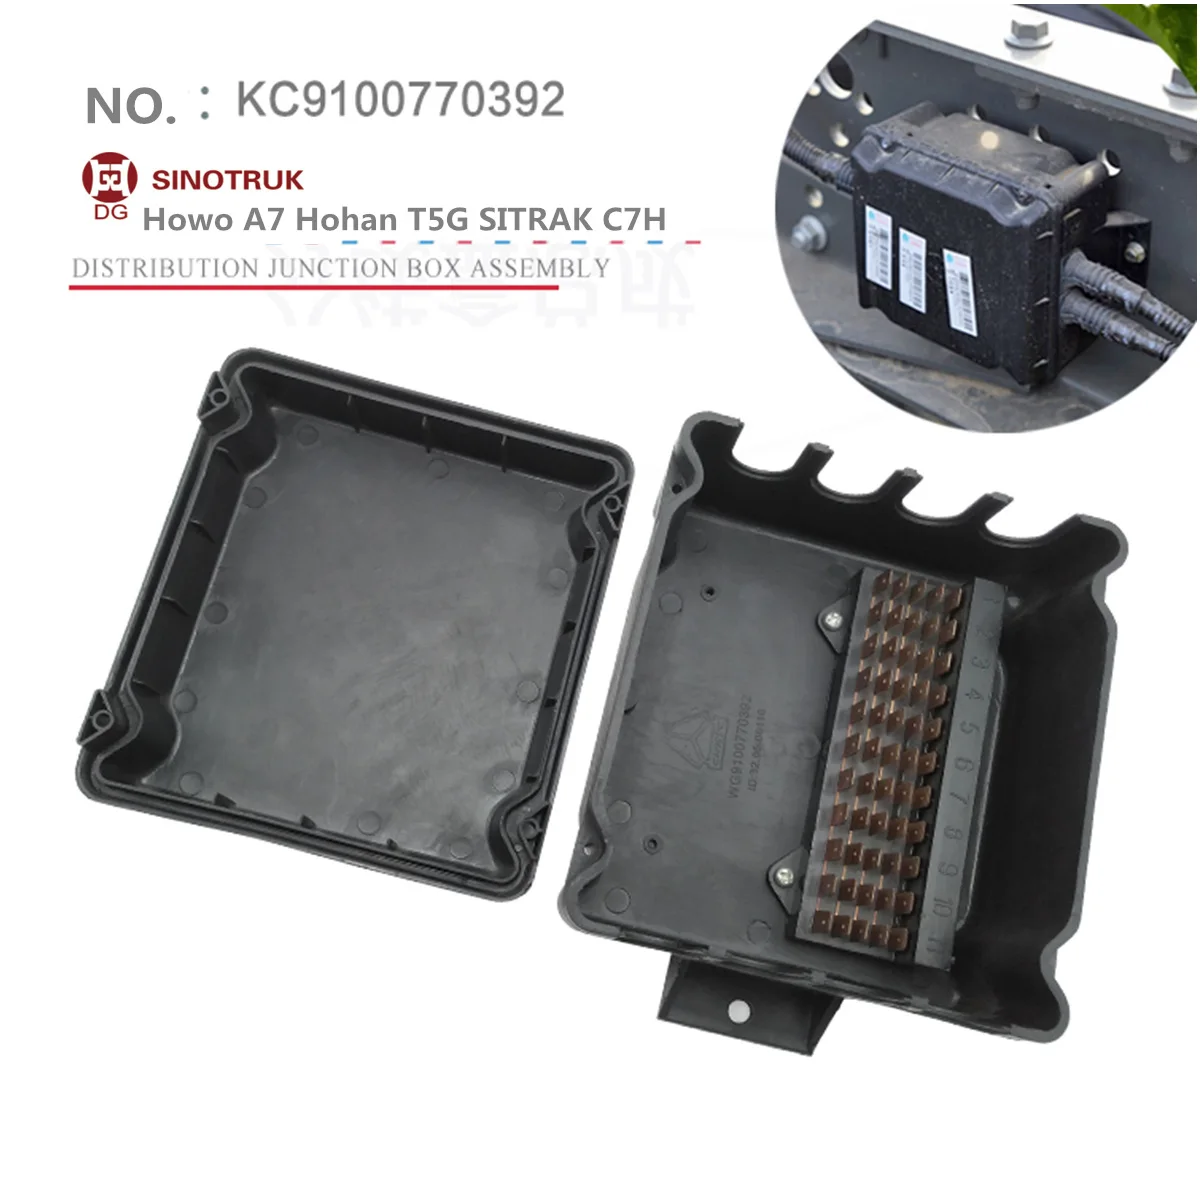 

KC9100770392 Distribution Junction Box For Sinotruk Howo A7 Hohan T5G SITRAK C7H Frame Over-power Box Rear Tail Light